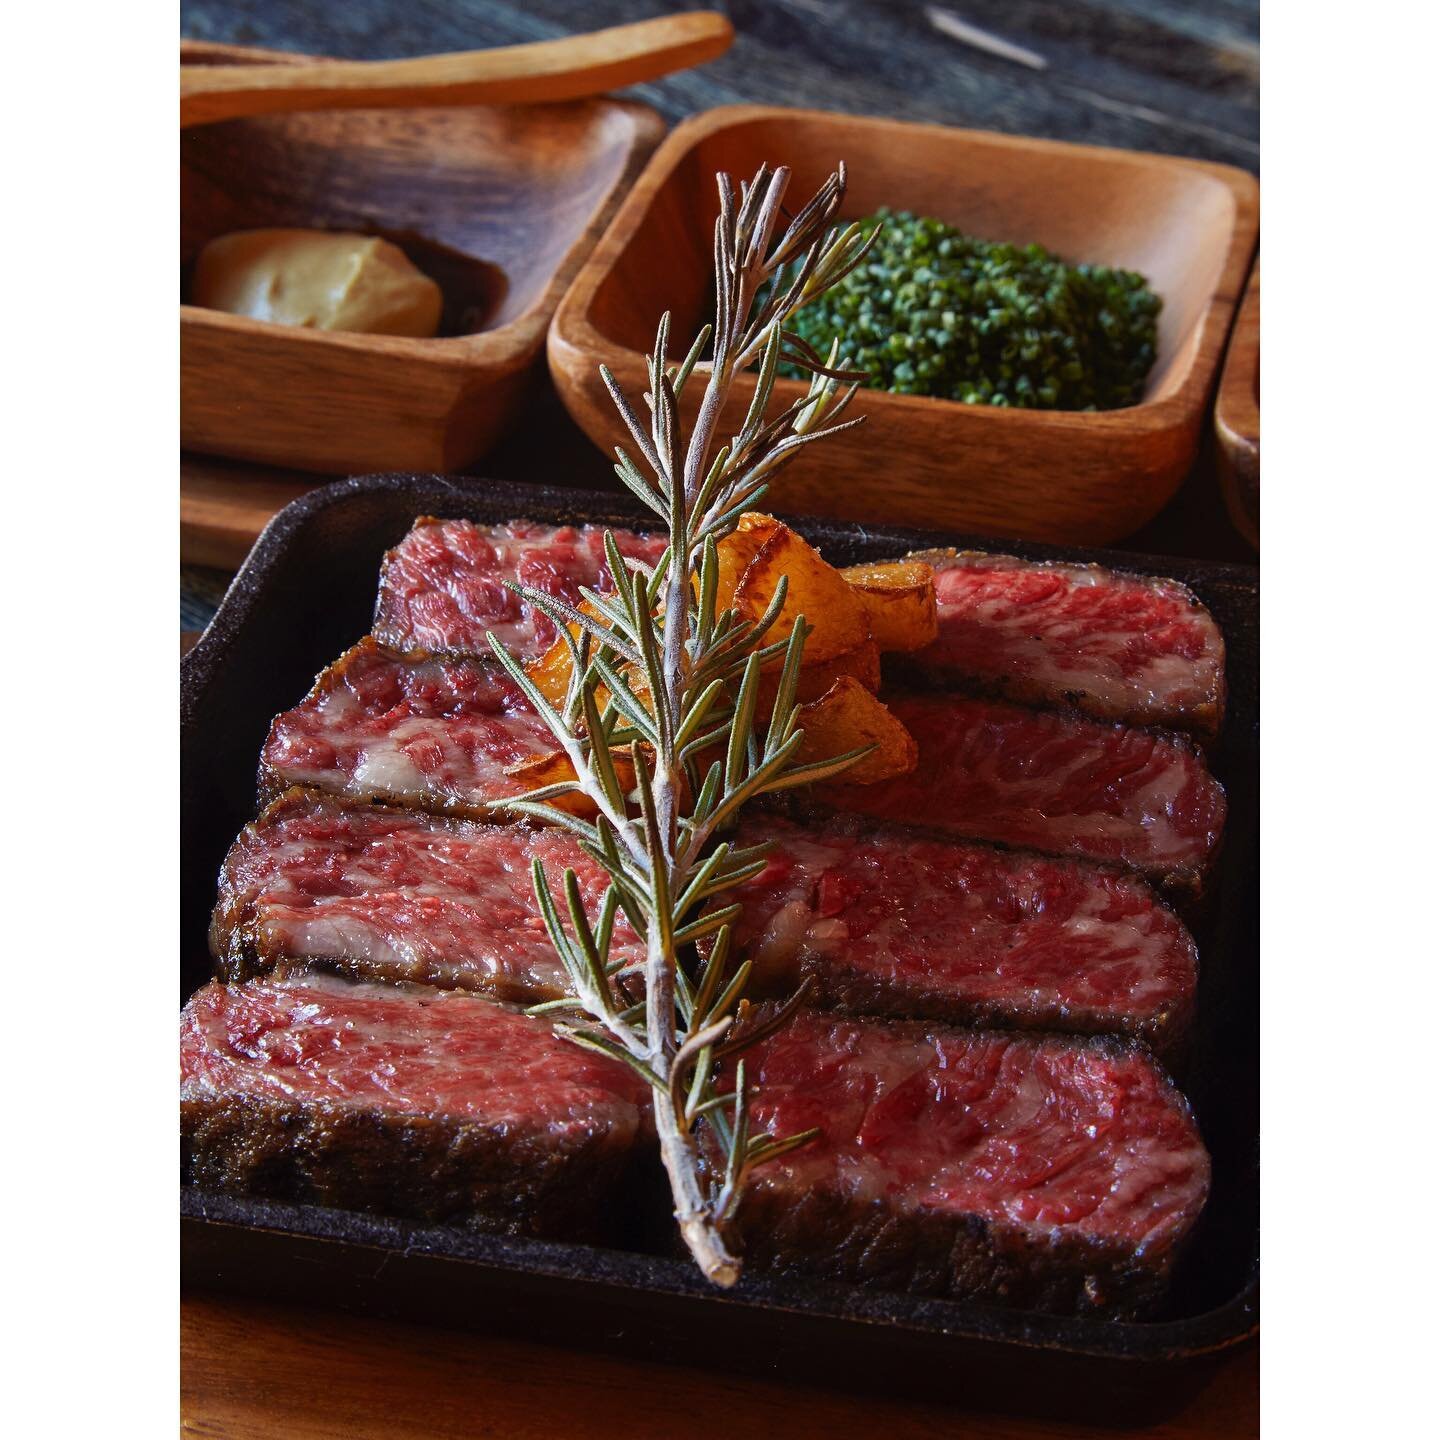 TODAY&rsquo;S STEAK
We&rsquo;re serving full menu now. That means our today&rsquo;s steak is back! Ask your server for today&rsquo;s cut. Served with shishito peppers, fried garlic, tamari-soy sauce, dijon mustard, chives, ichimi-hot pepper salt. An 